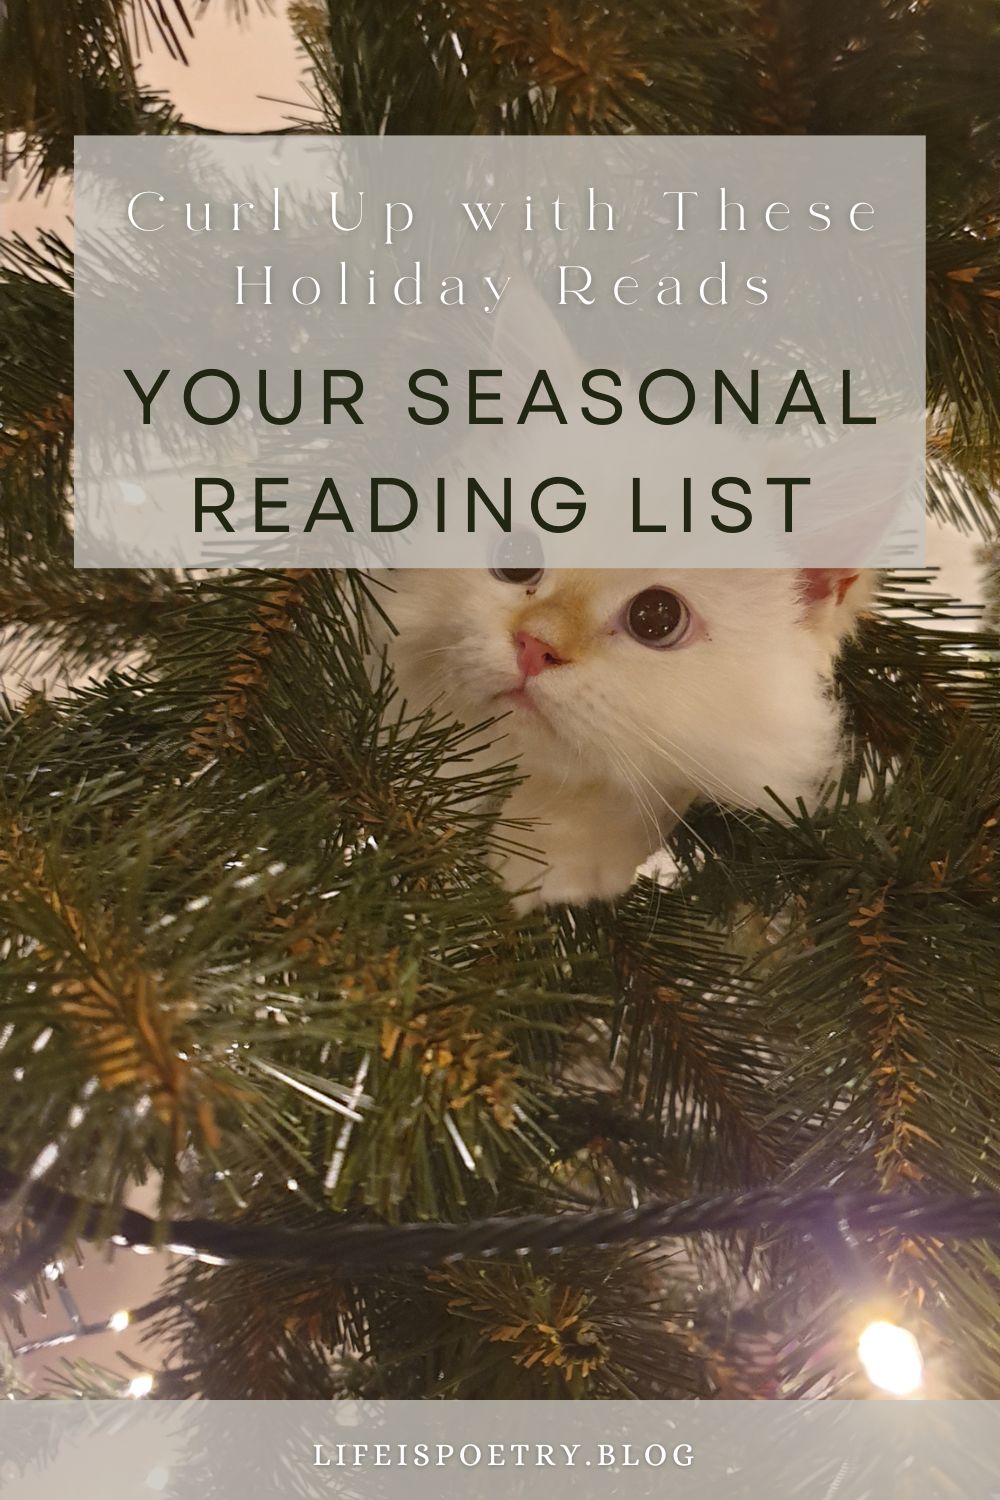 A Festive Reading List To Welcome The Holiday Season